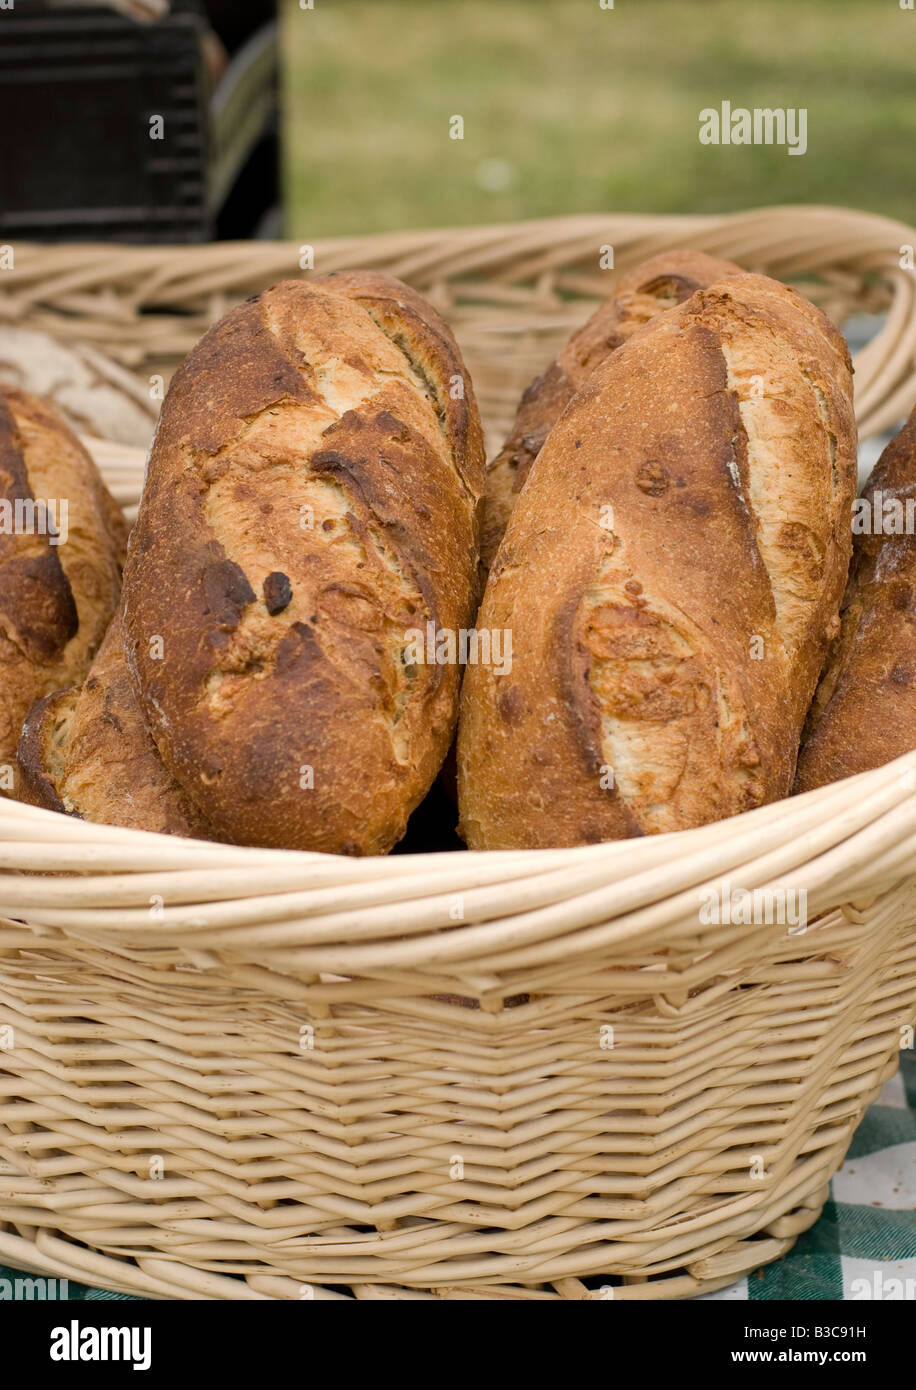 Individual loaves of bread for sale at a farmers market Stock Photo